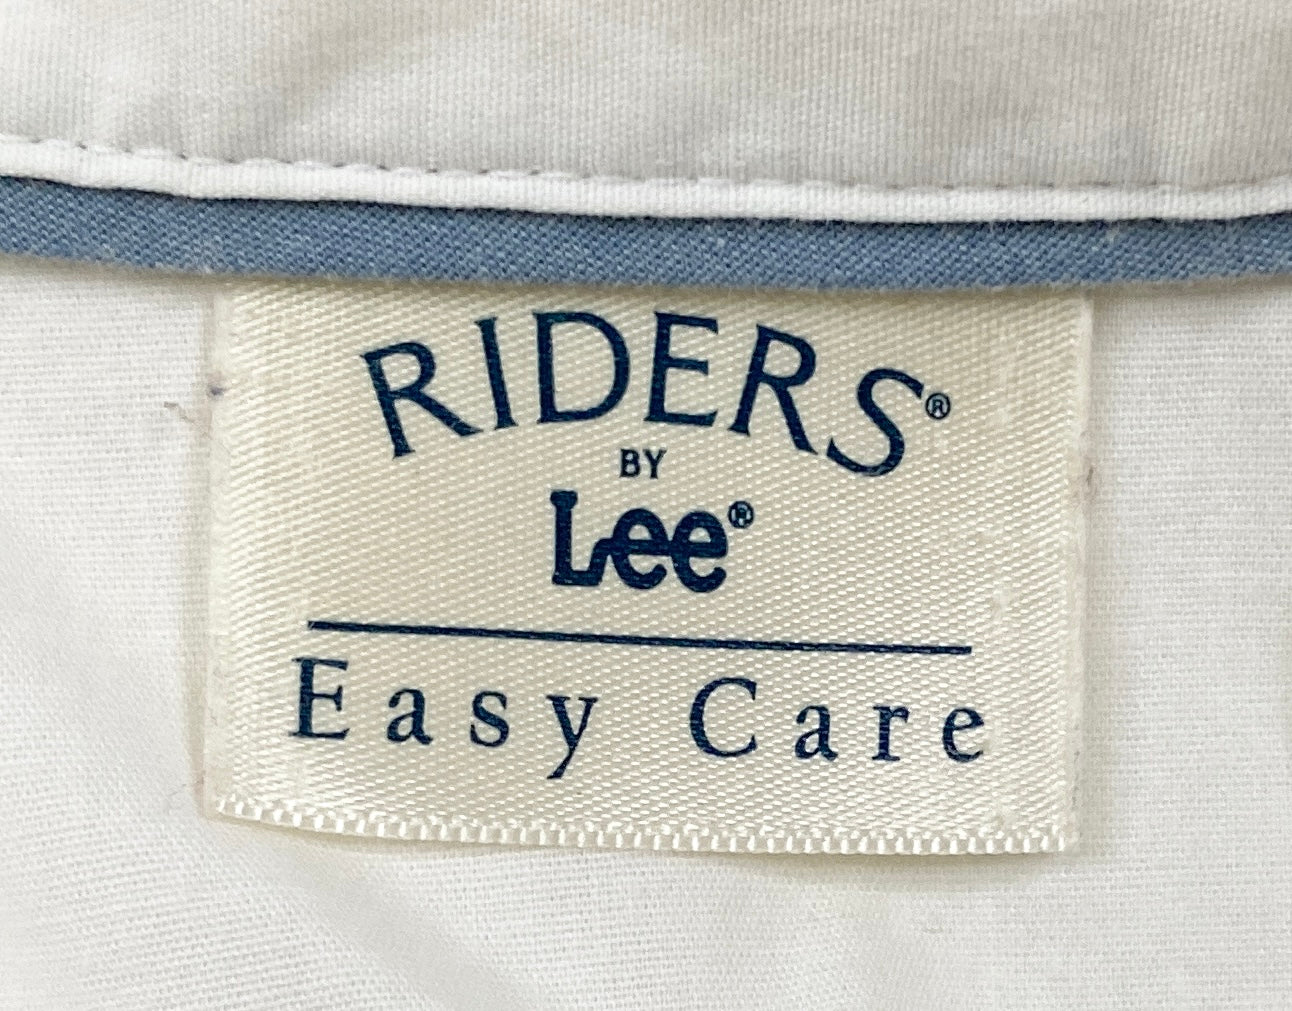 Lee Riders Blouse White Fitted Size L  SKU 000366-8